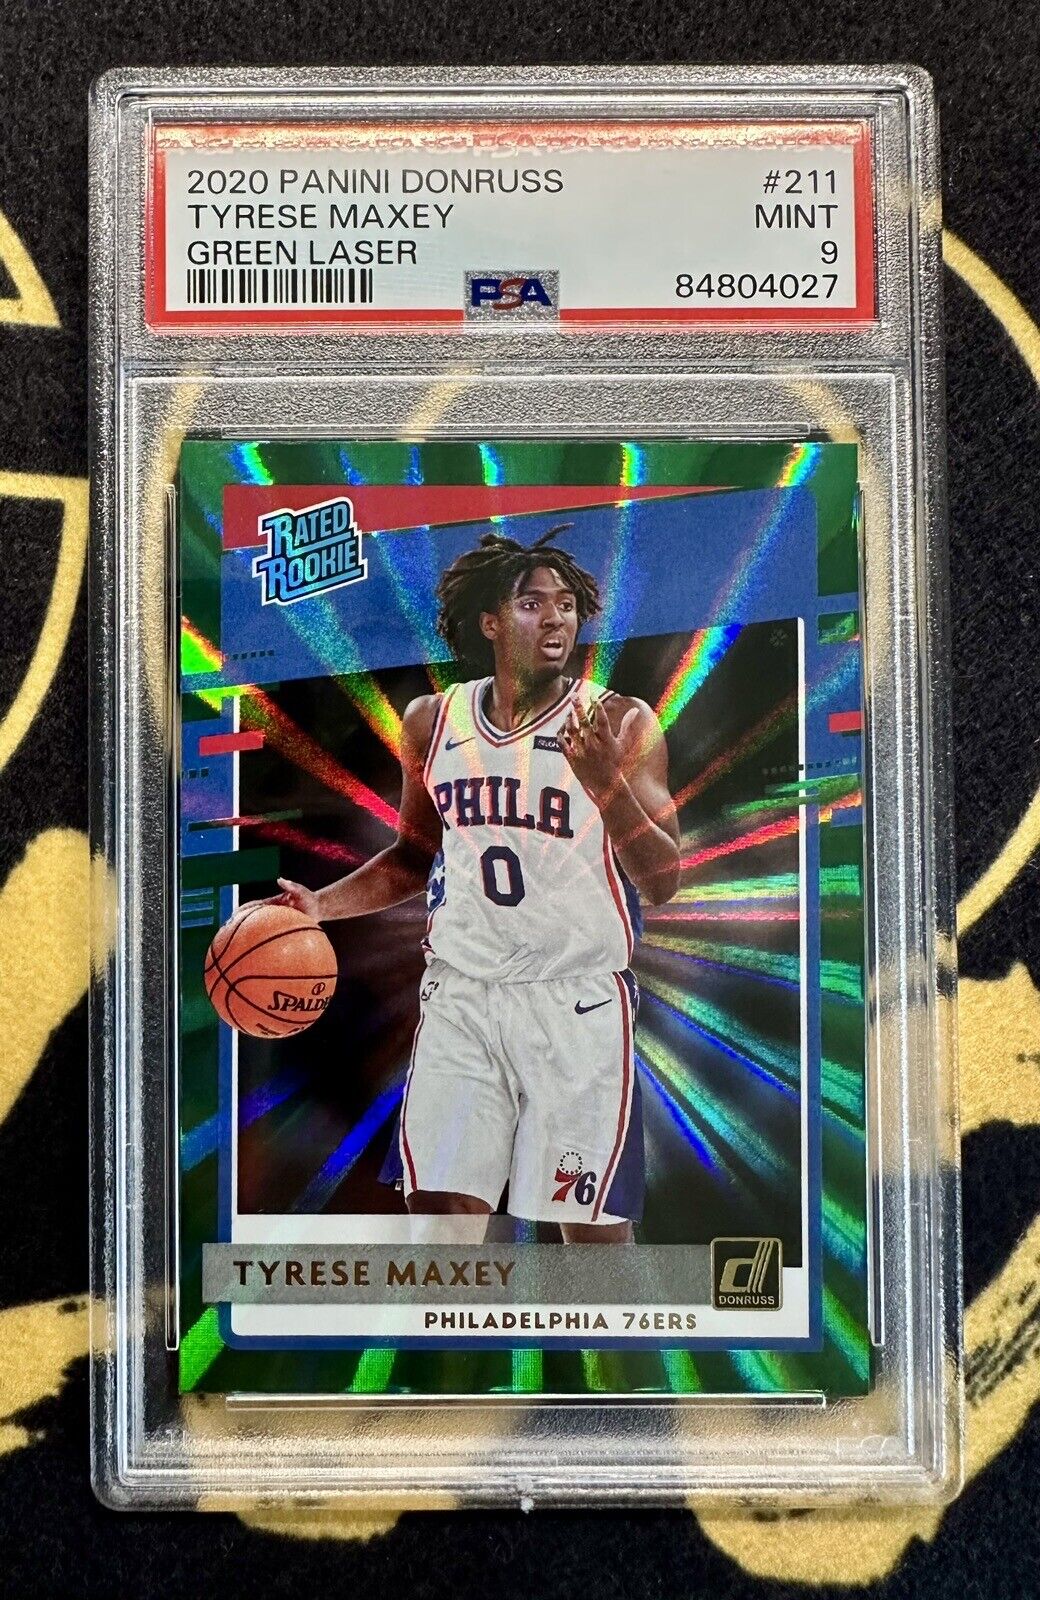 2020-21 Panini Donruss Tyrese Maxey RC Rated Rookie Green Laser PSA 9 MINT